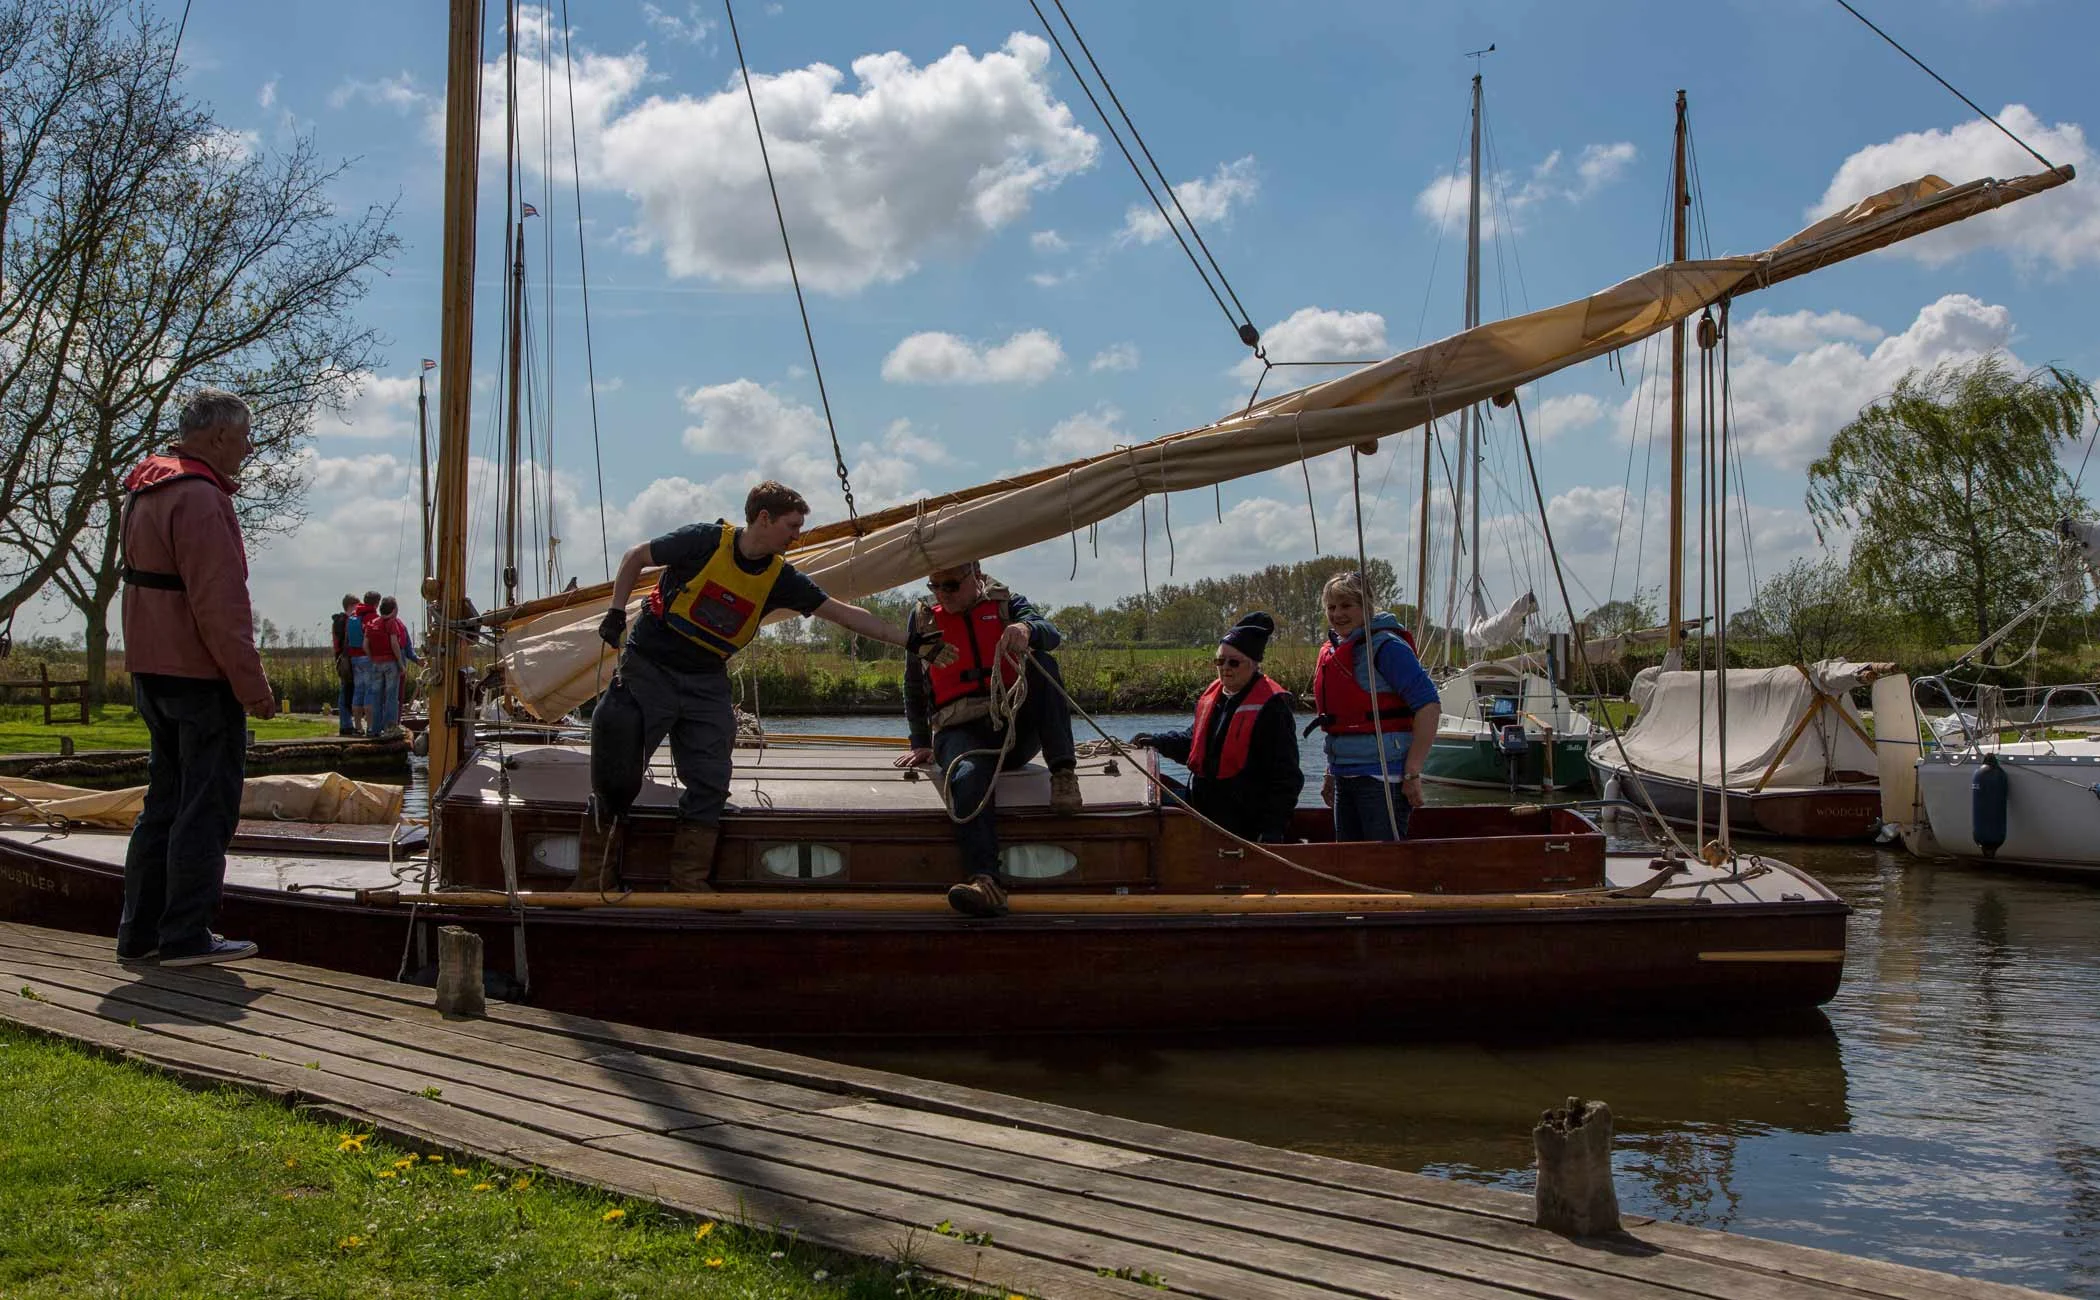 A group on one of our courses learning the ropes on a traditional Broads cabin yacht